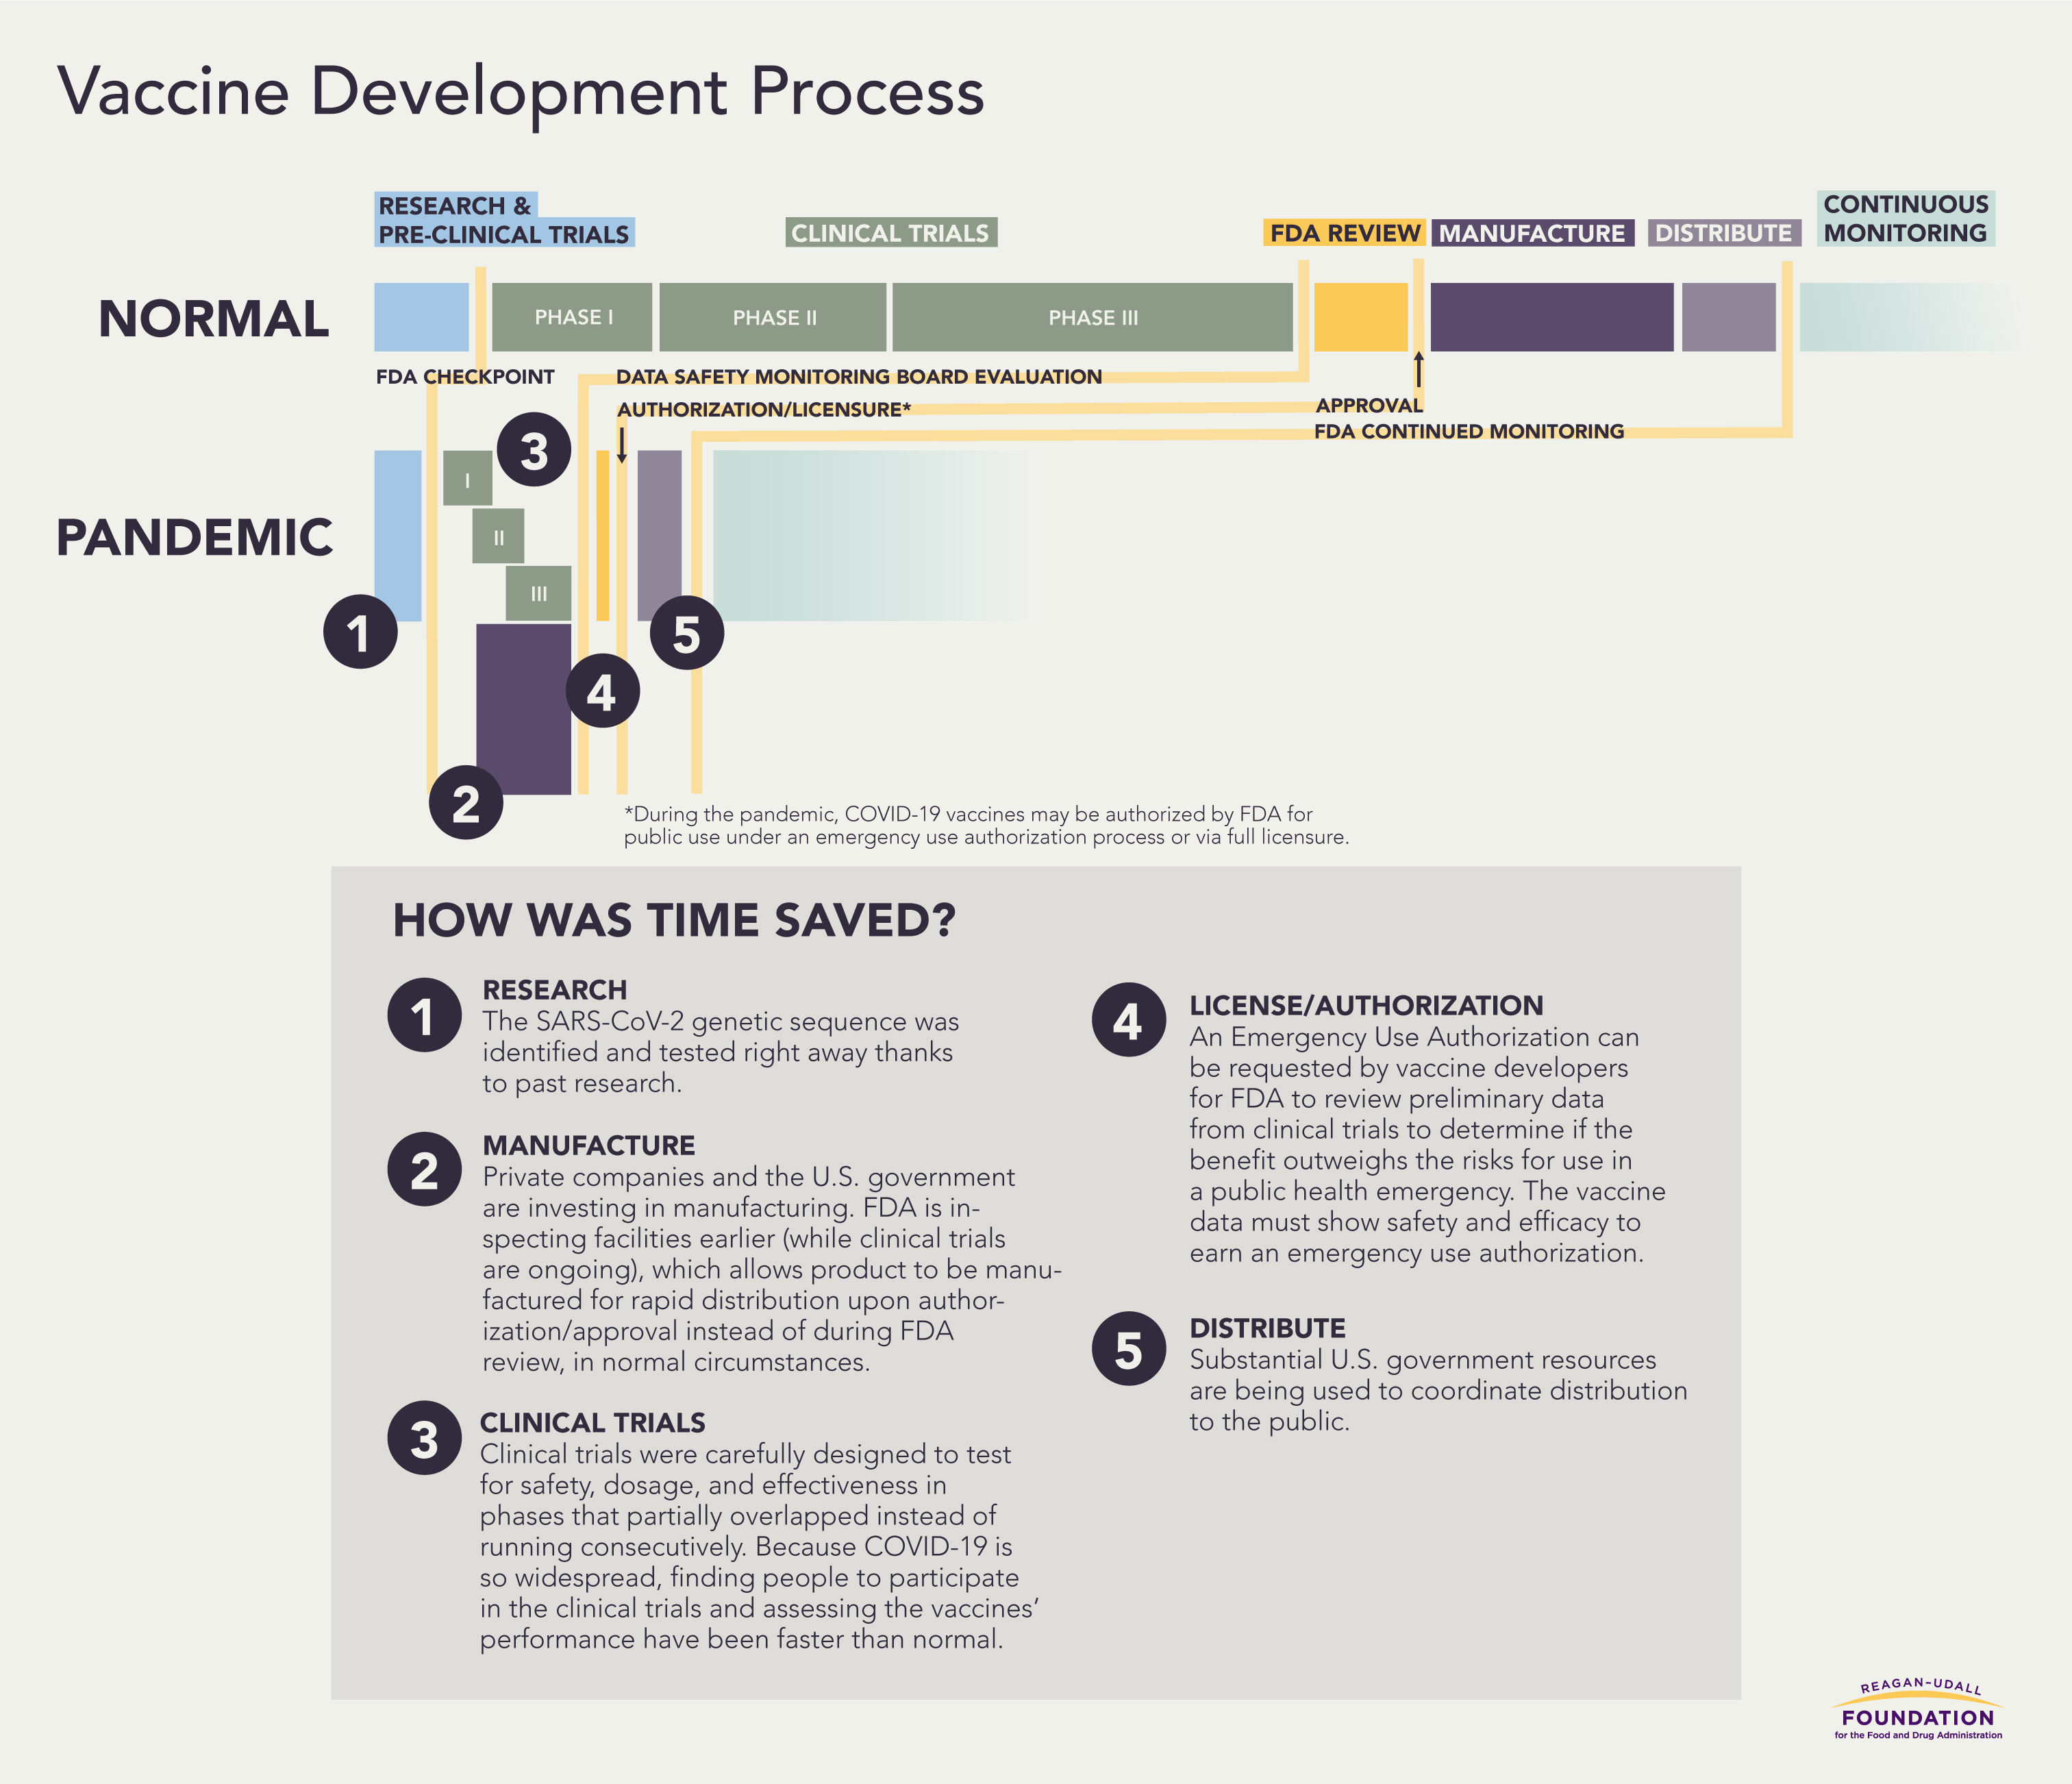 How was time saved in the Vaccine Development Process?